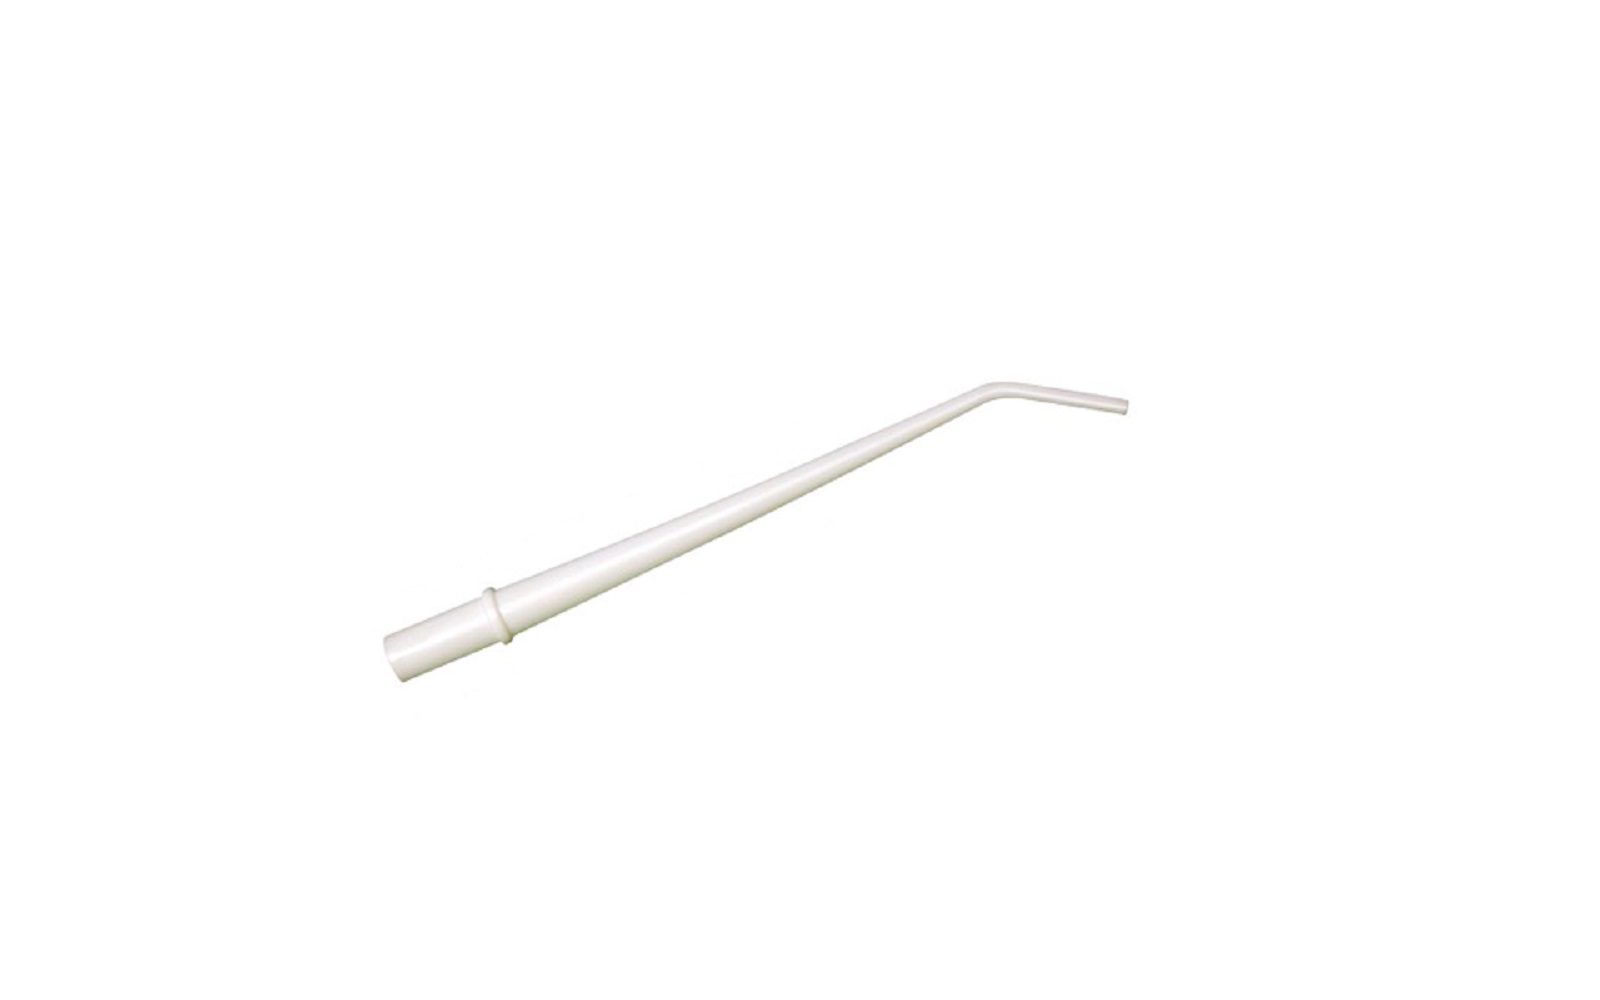 Surgical_aspirating_tip_025_white_st